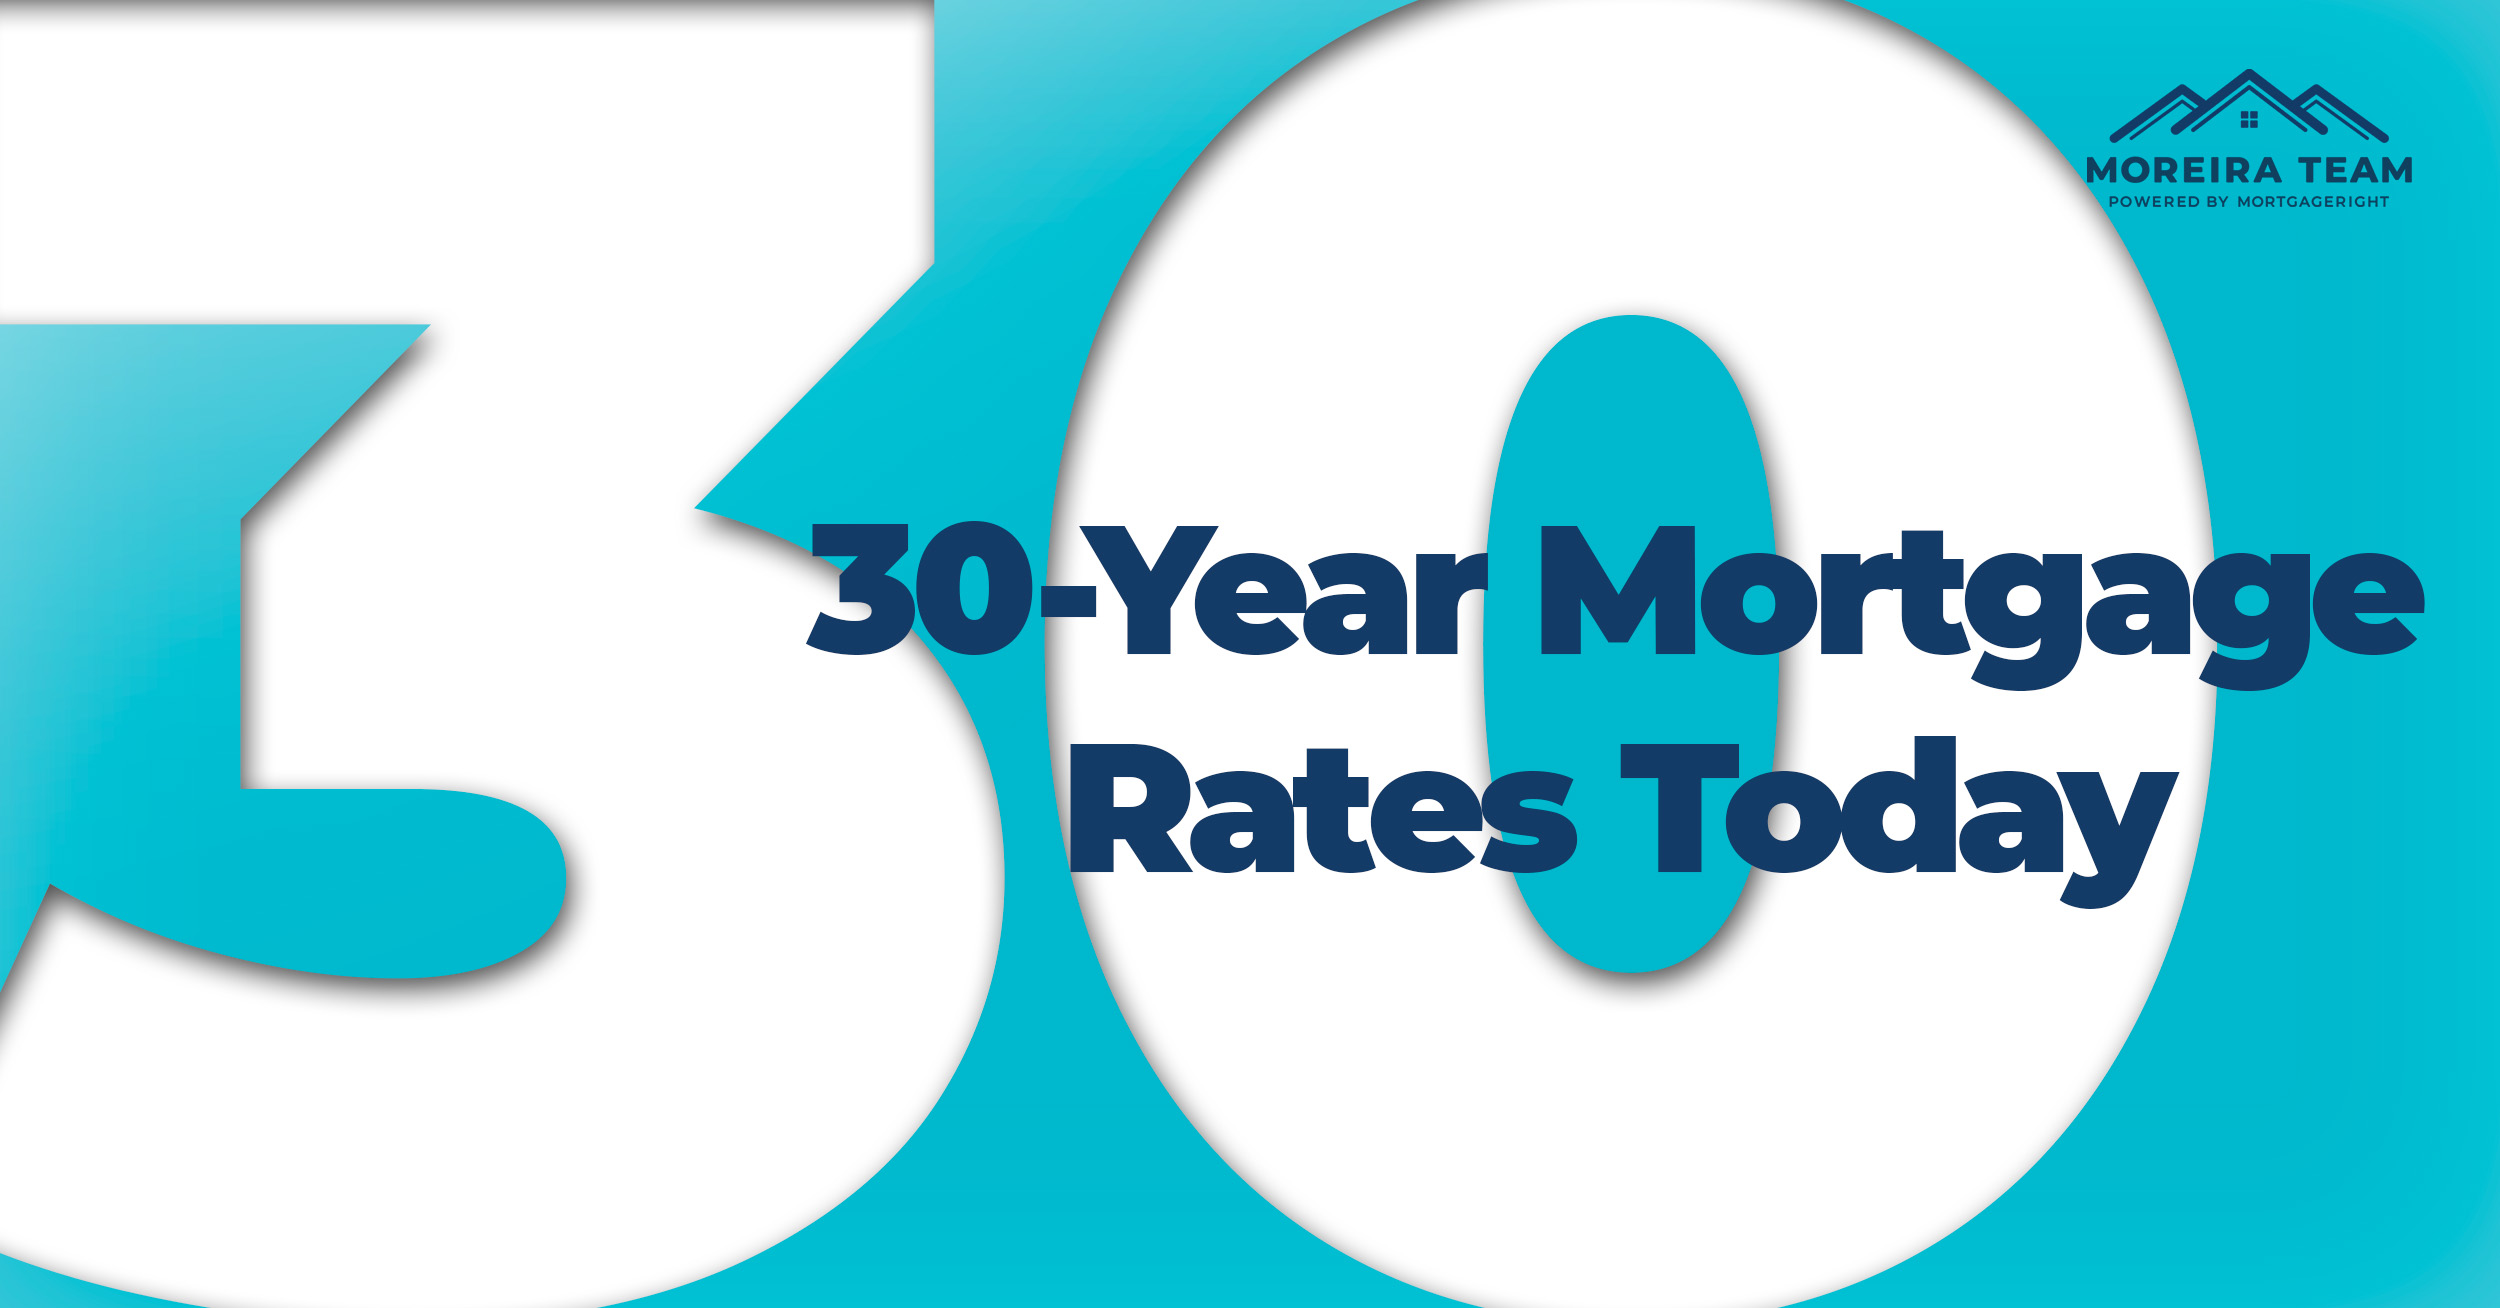 30-Year Mortgage Rates Today